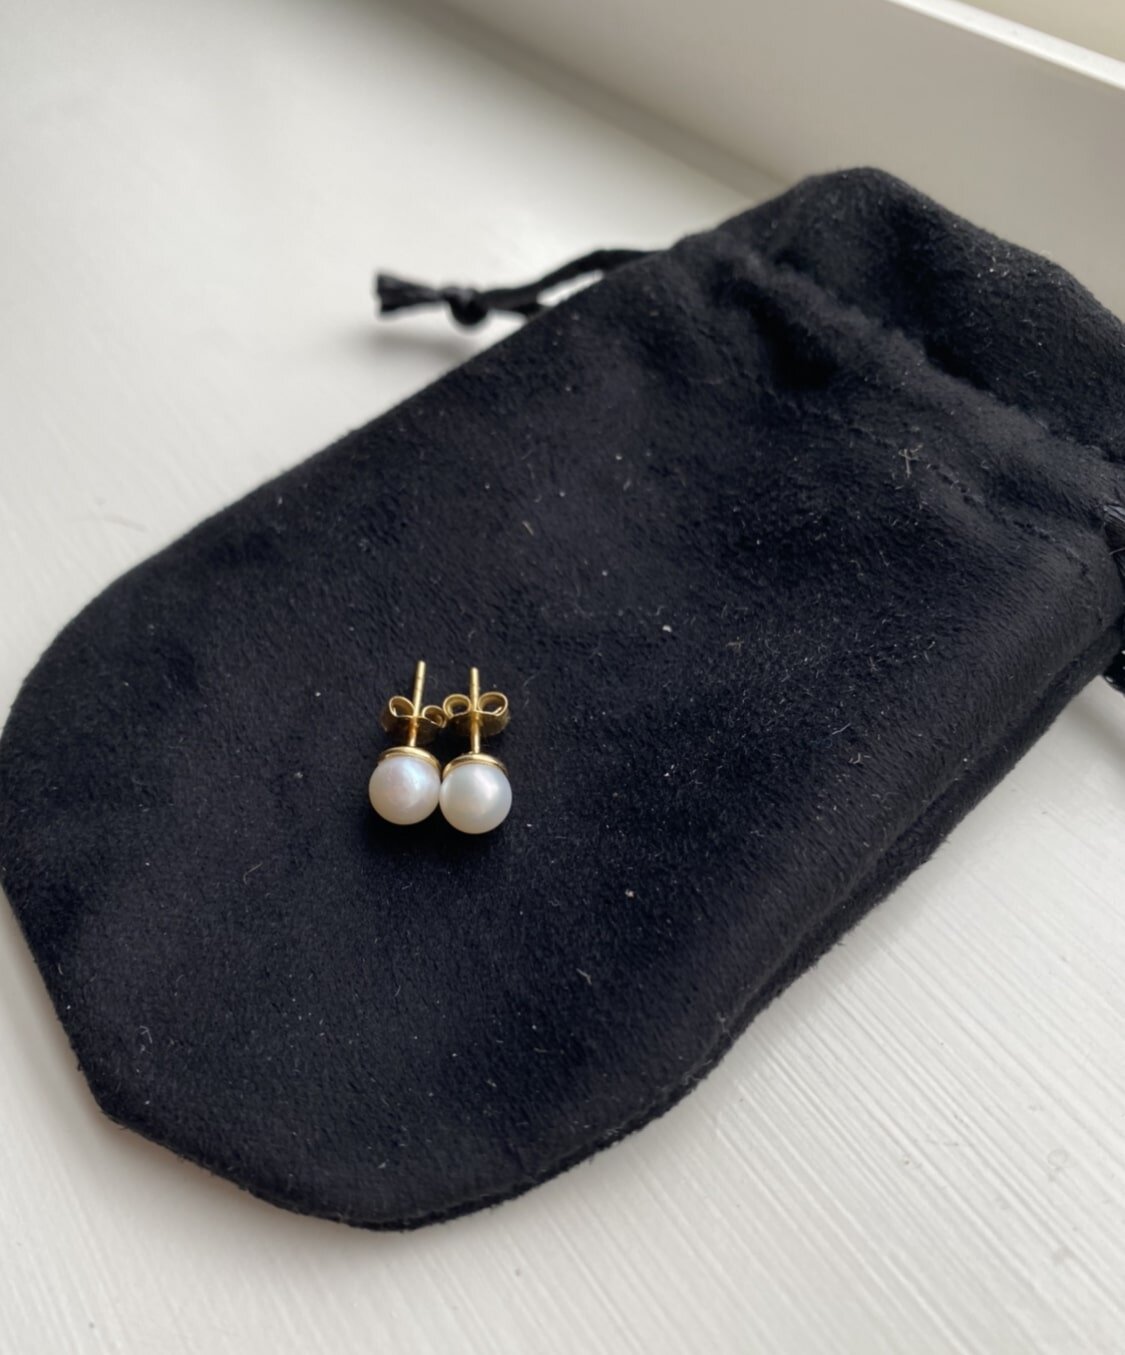 Quince One Quince Review The Pearl Stud Earrings Updated February 21 Fairly Curated